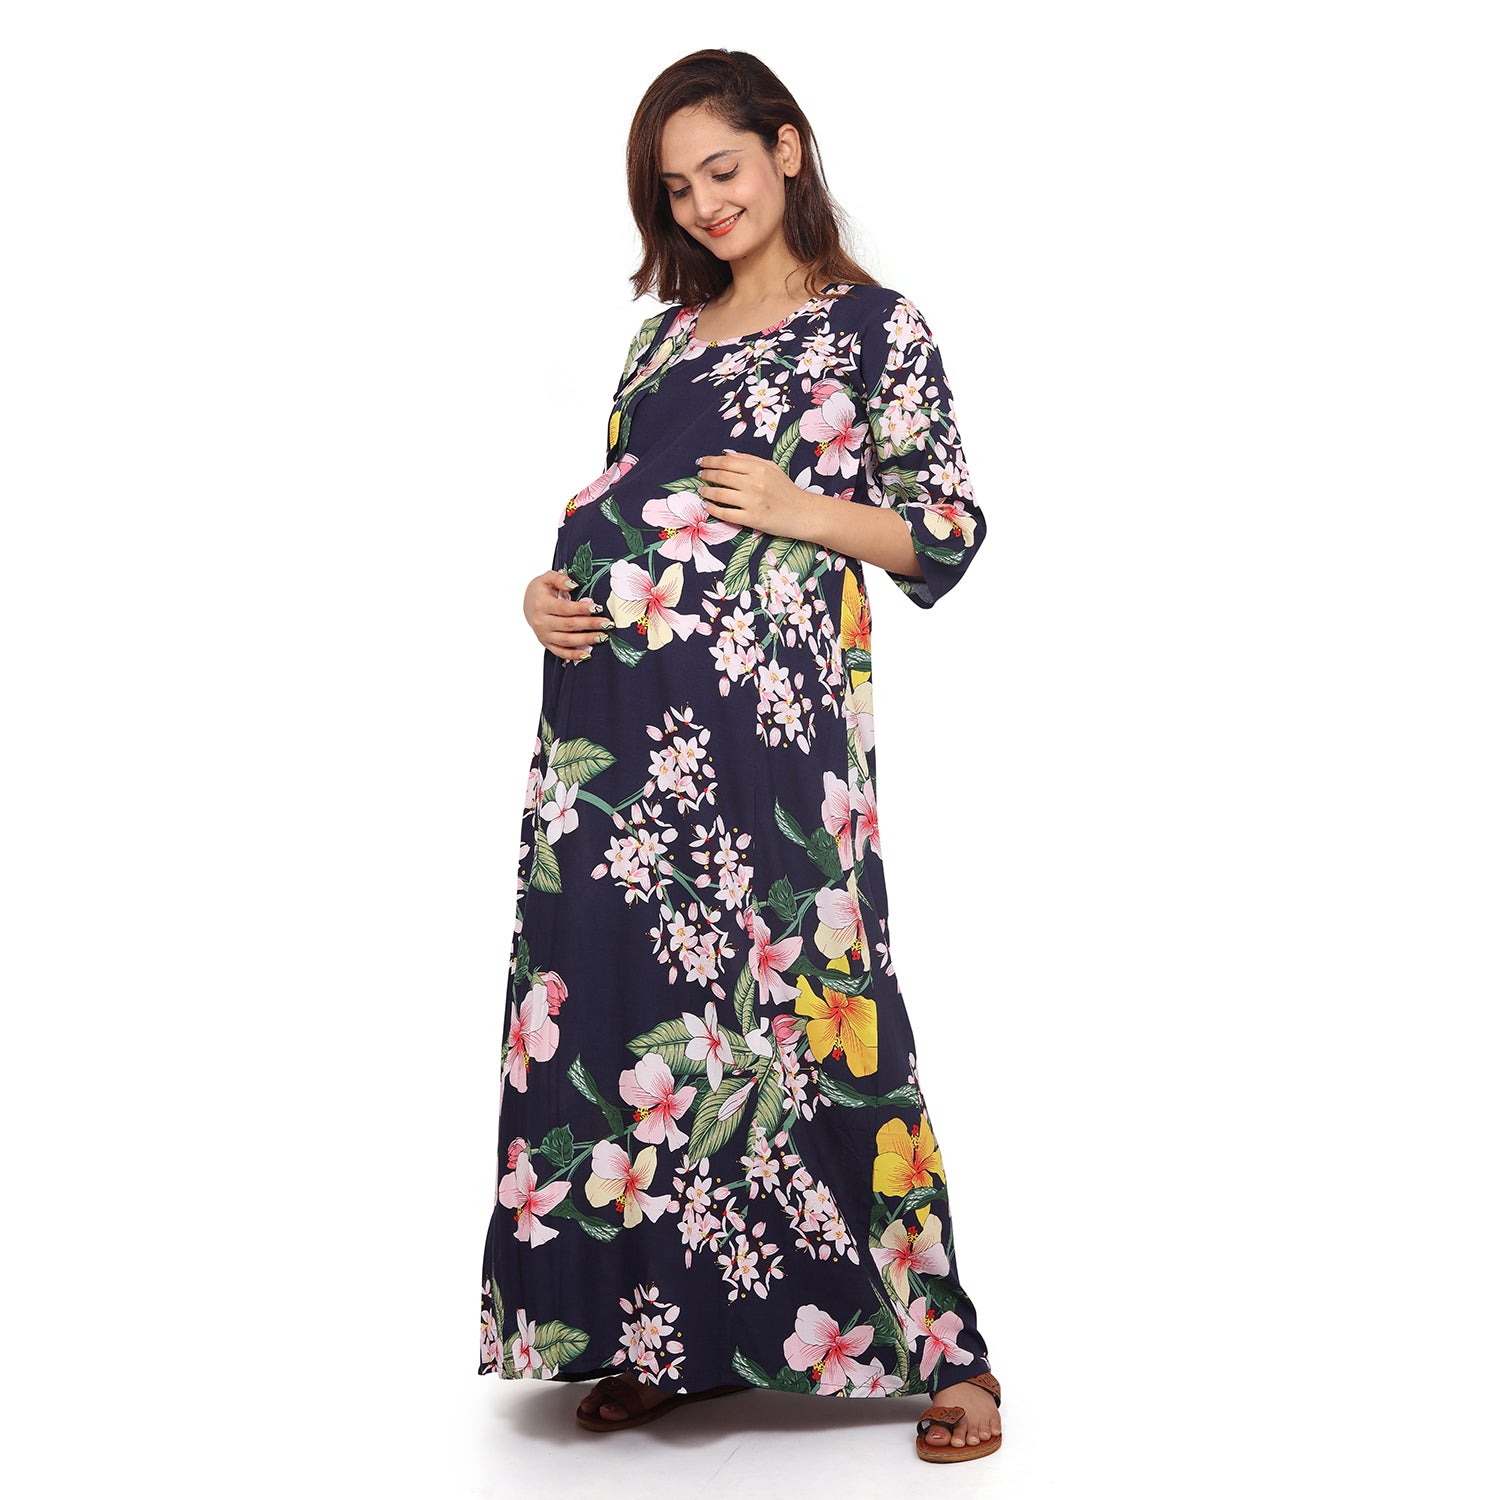 Baby Moo Full Length Comfortable Nursing And Maternity Dress Floral Lily - Blue - Baby Moo